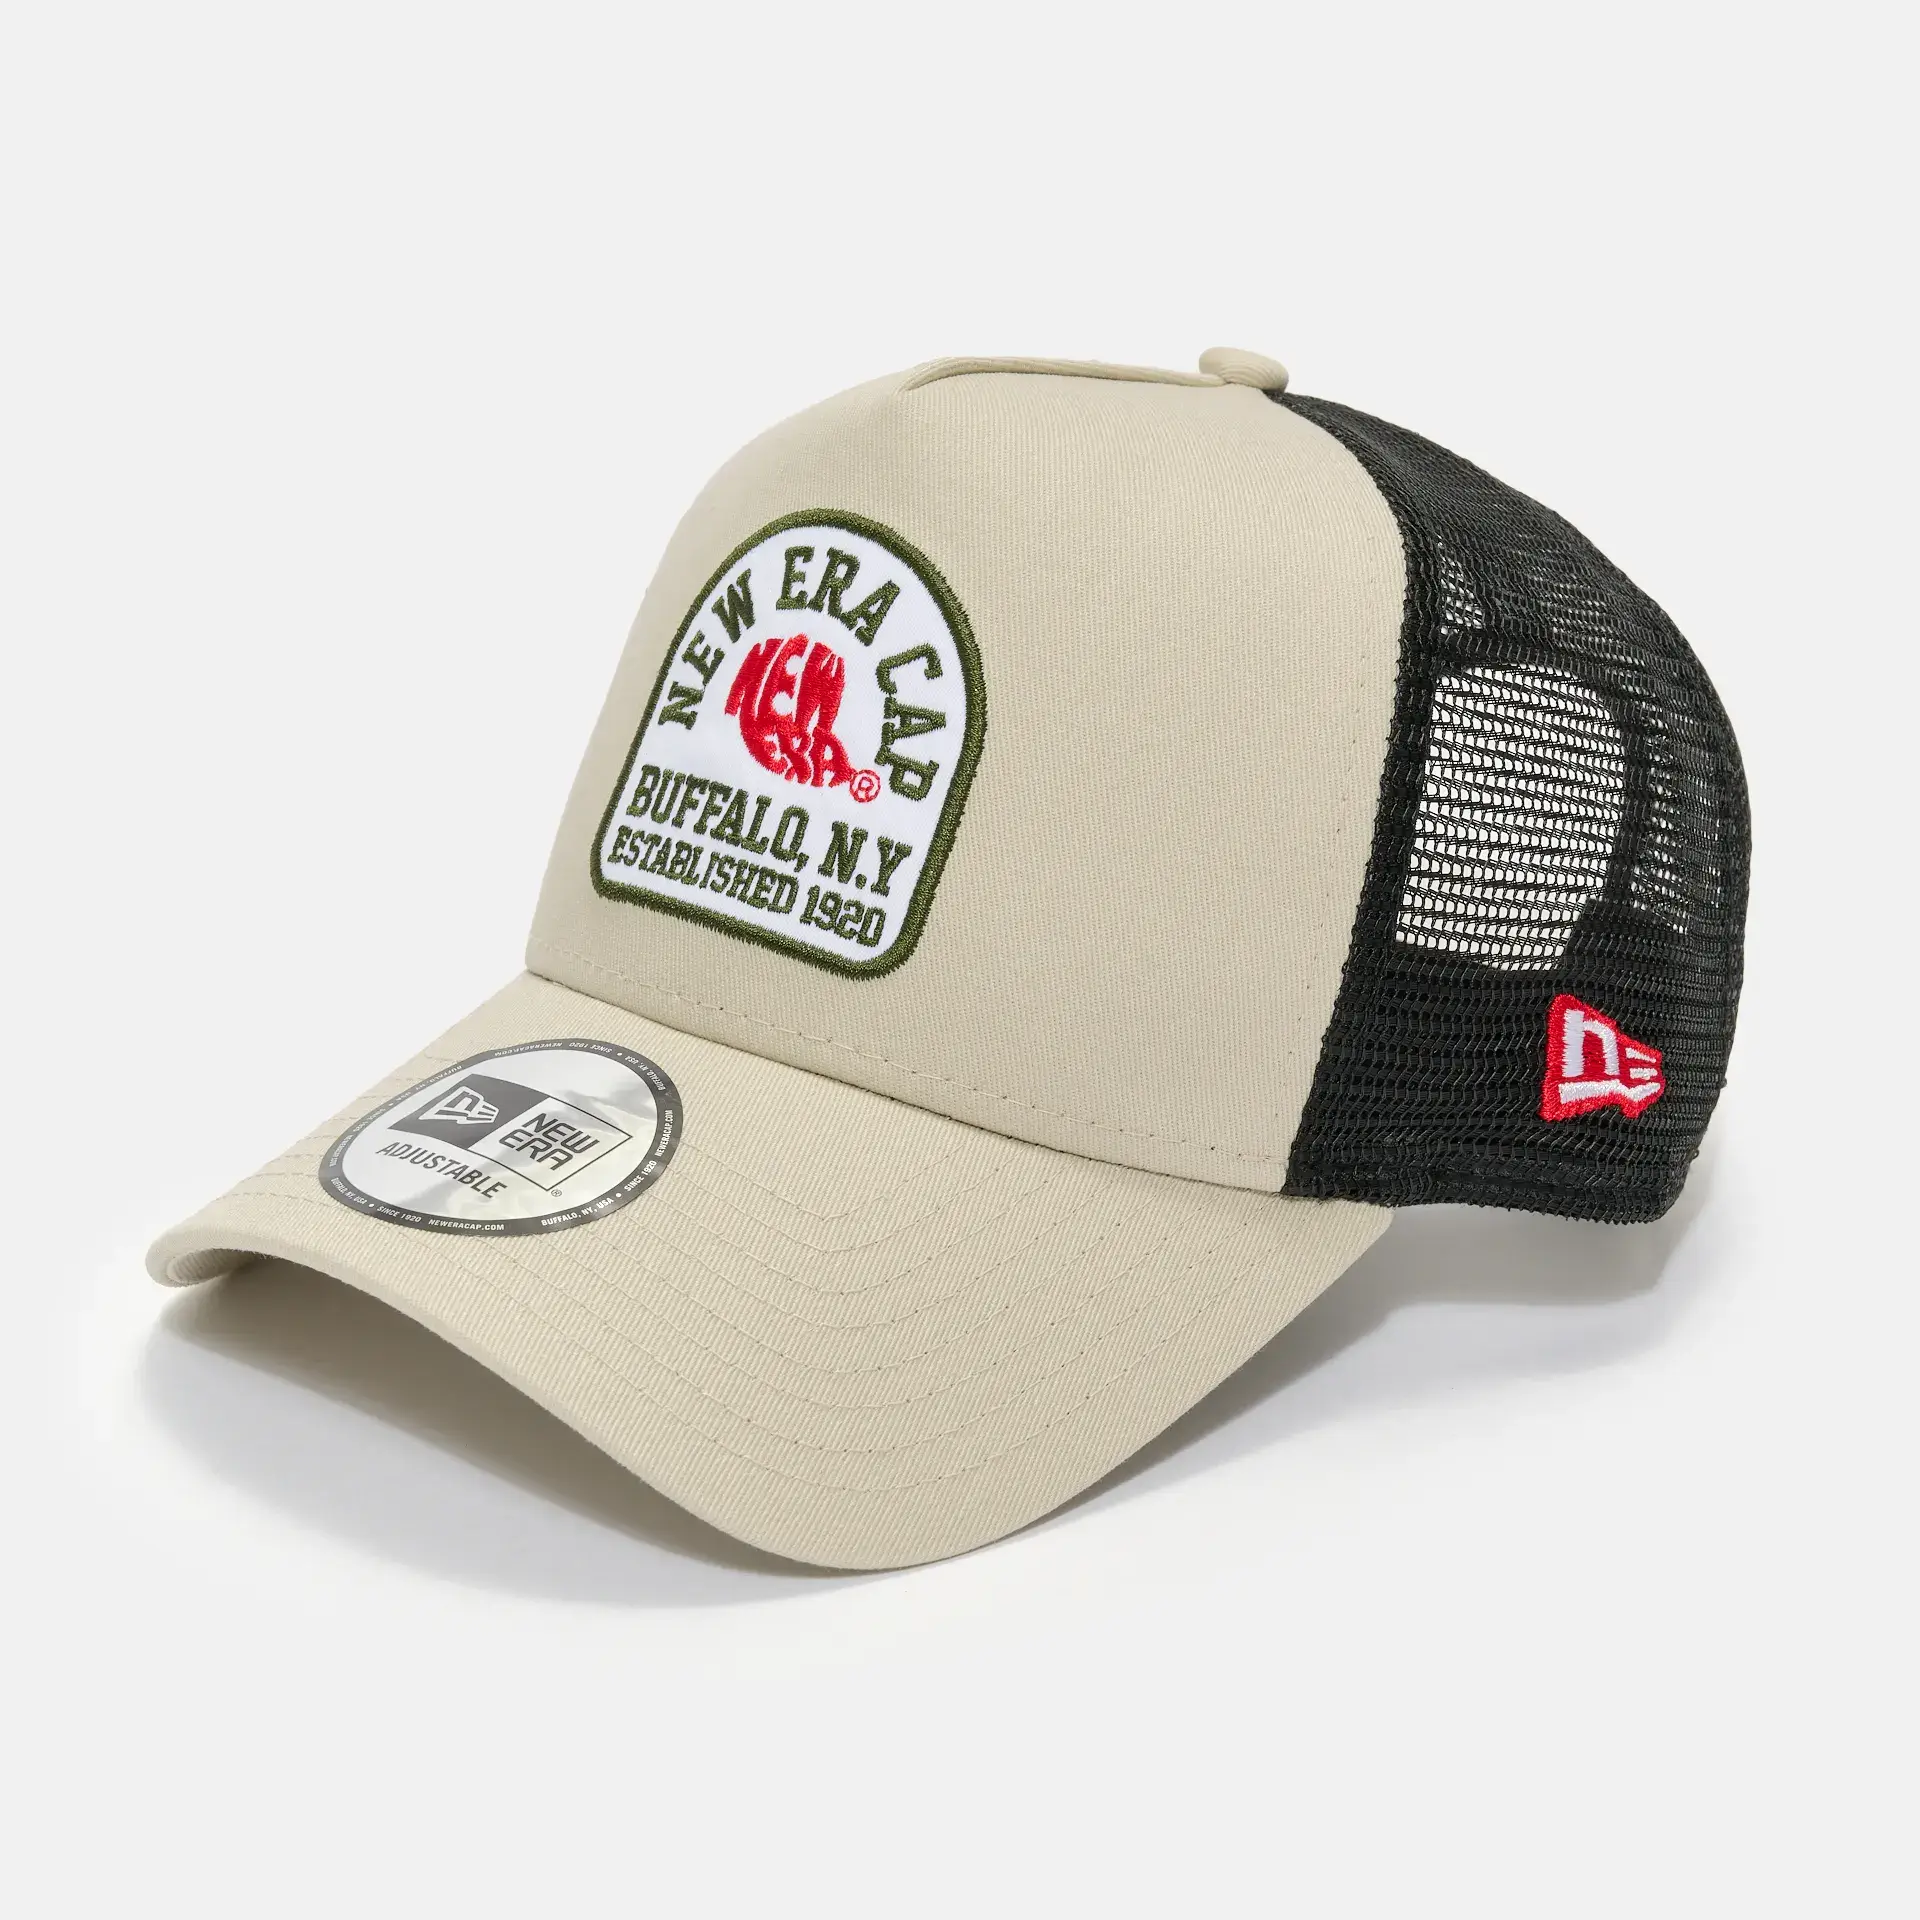 New Era State Patch 9Forty Trucker Cap Stone/Stone